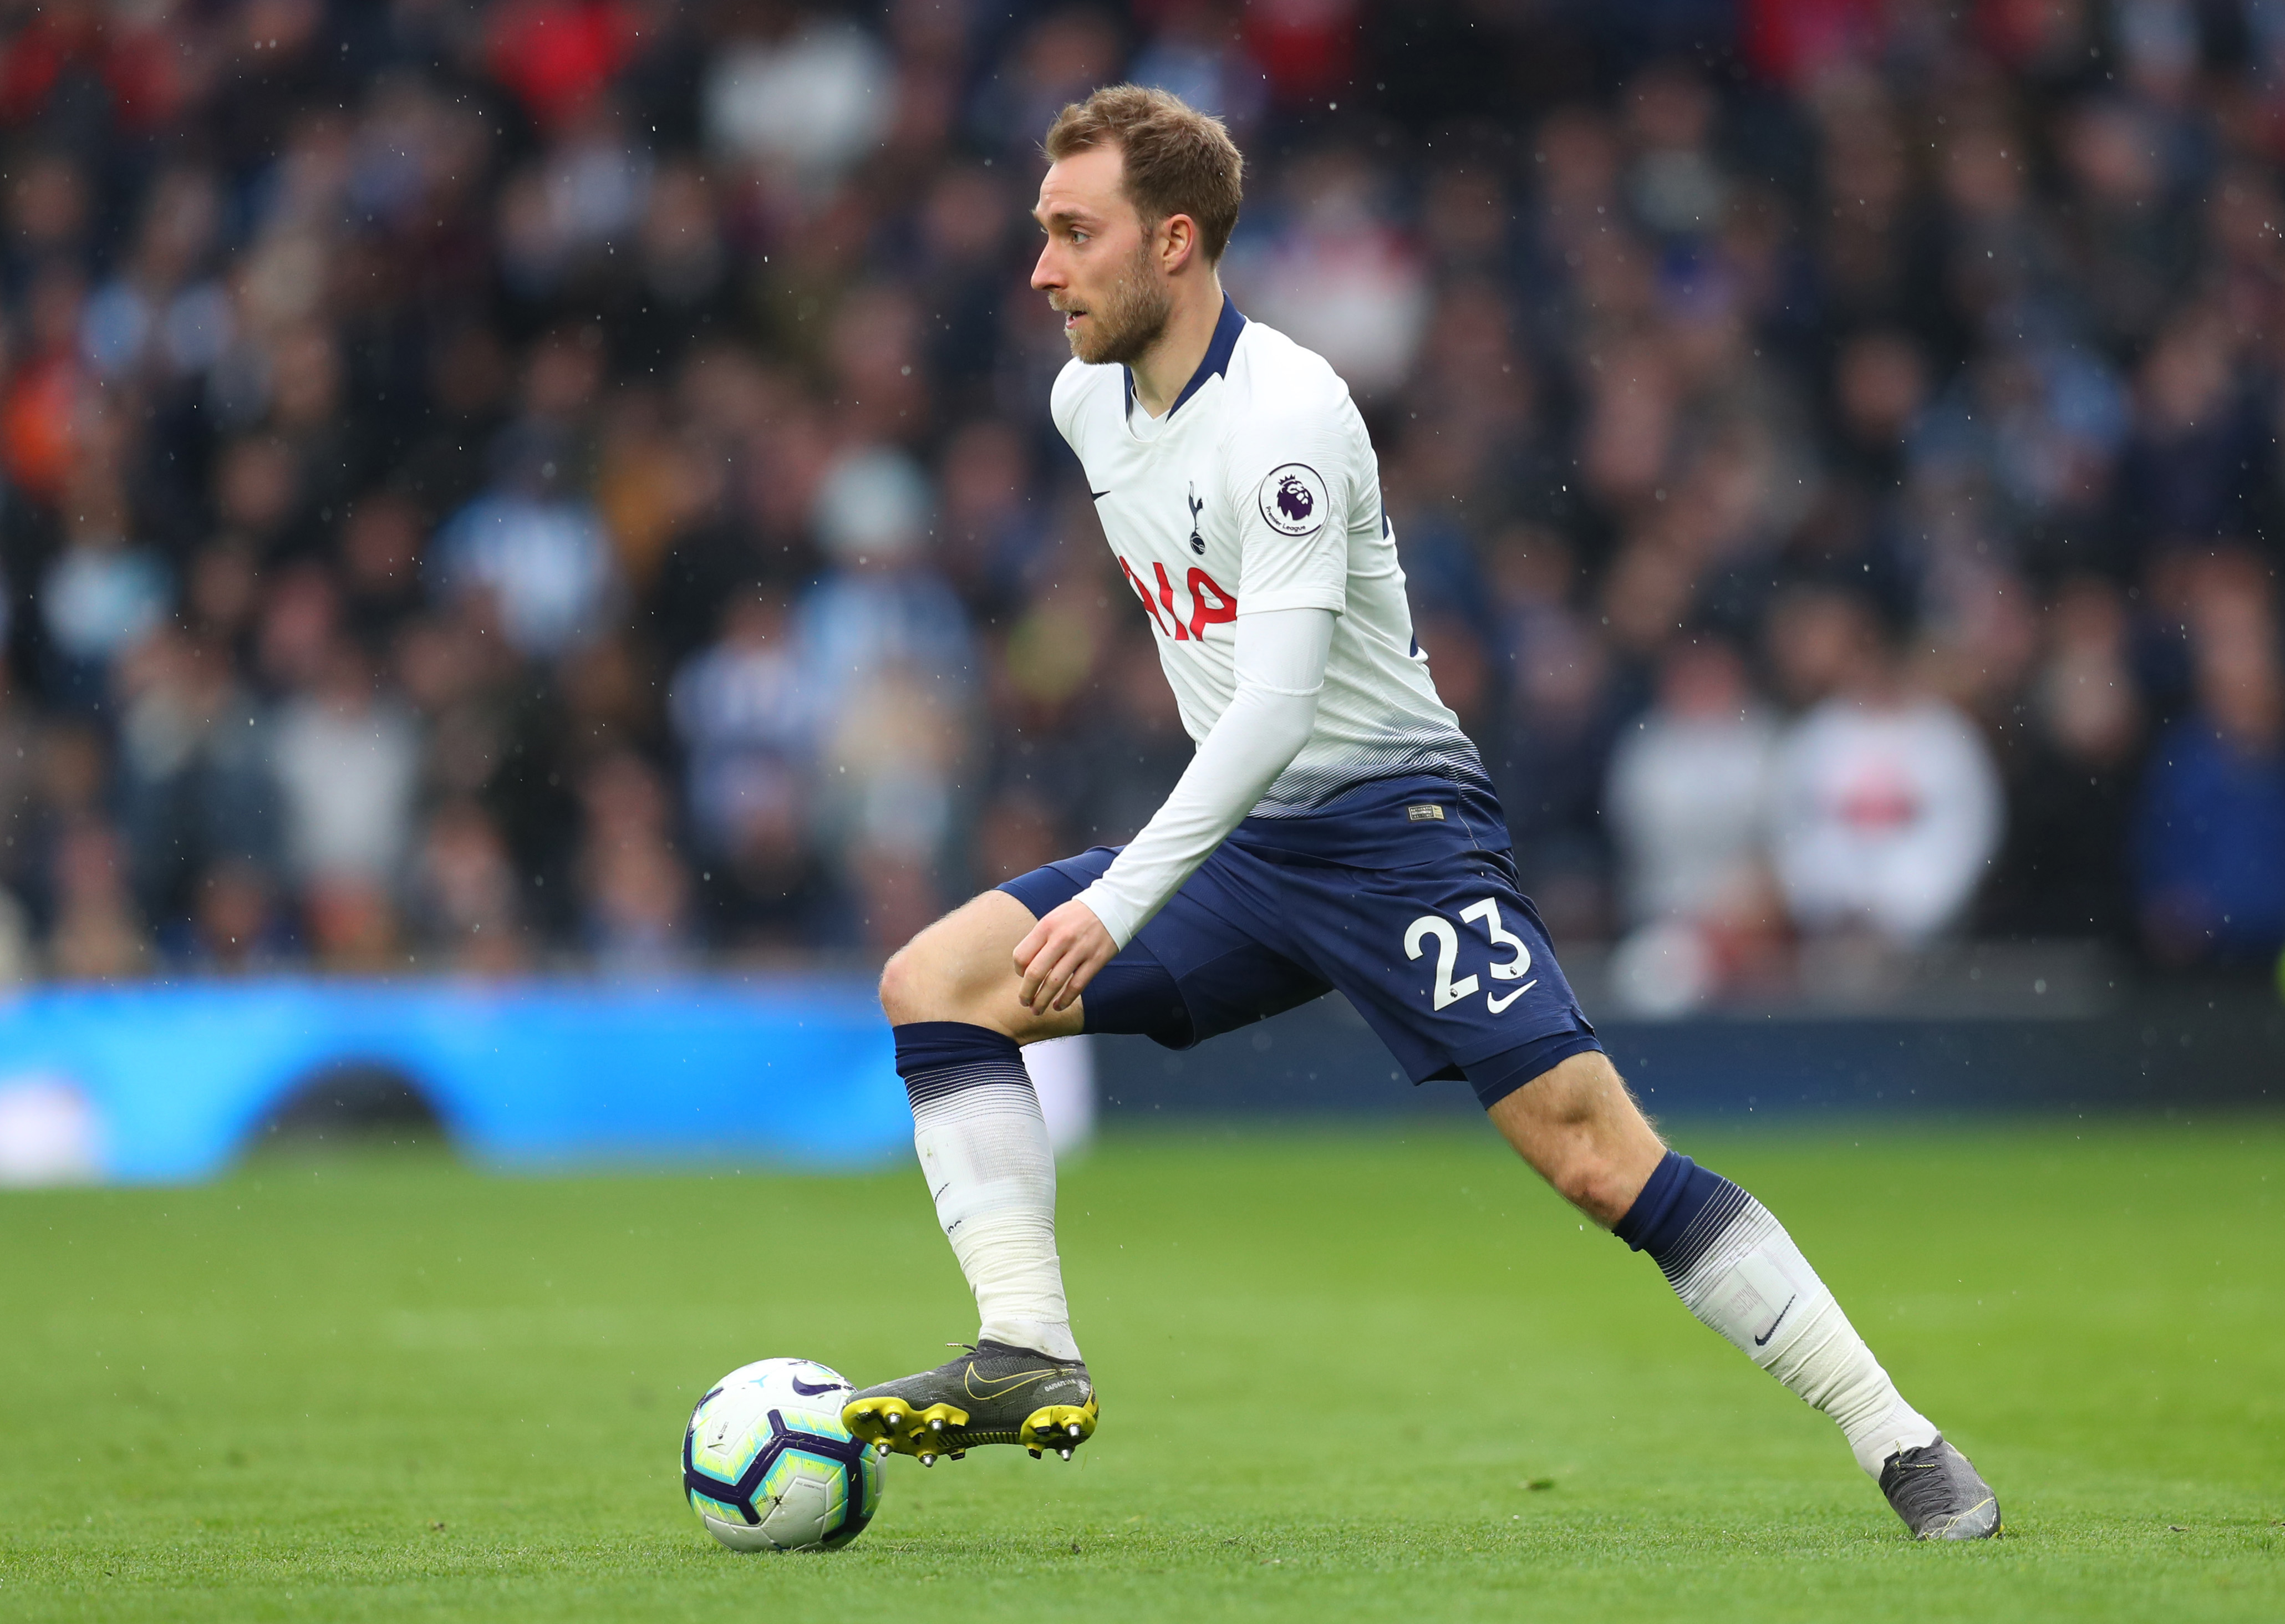 LONDON, ENGLAND - APRIL 13:  Christian Eriksen of Tottenham Hotspur  during the Premier League match between Tottenham Hotspur and Huddersfield Town at Tottenham Hotspur Stadium on April 13, 2019 in London, United Kingdom. (Photo by Catherine Ivill/Getty Images)